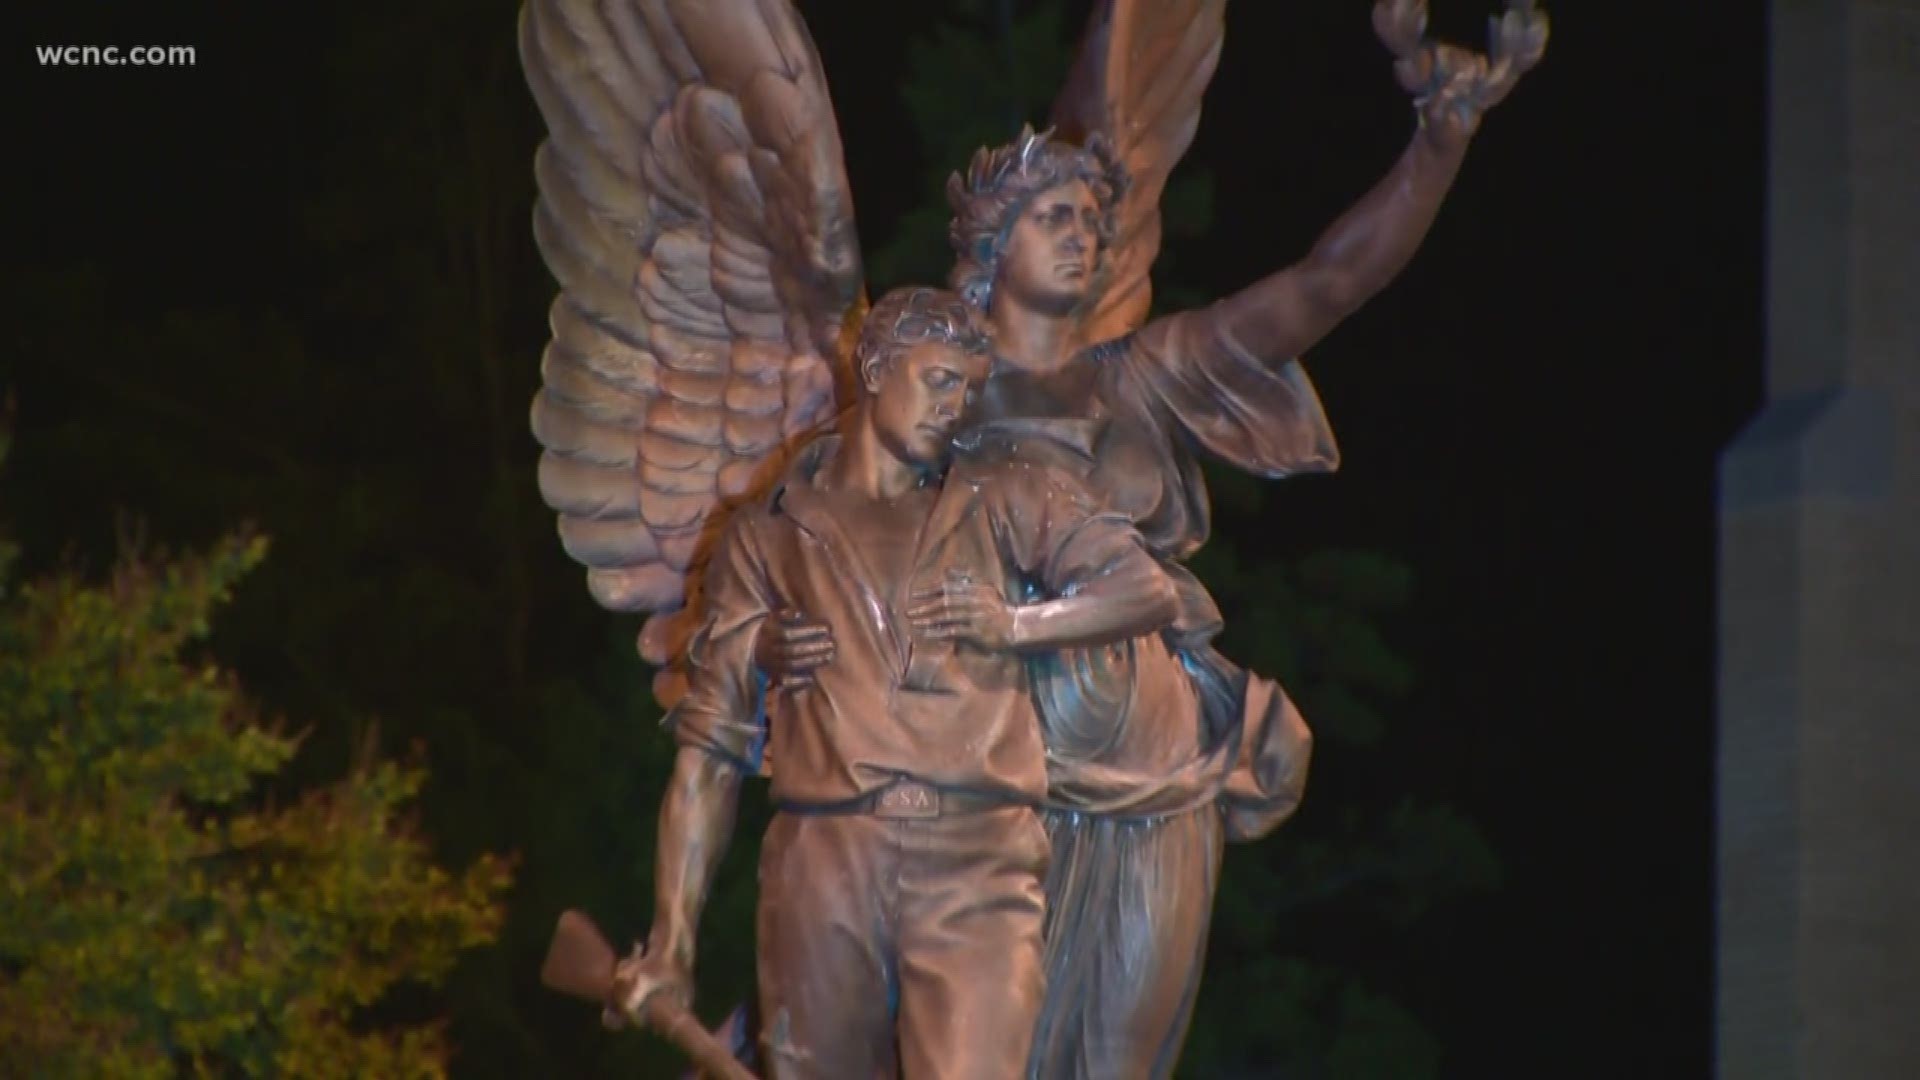 Some want the Fame statue, which pays tribute to Confederate soldiers, to stay. Others want it to go.